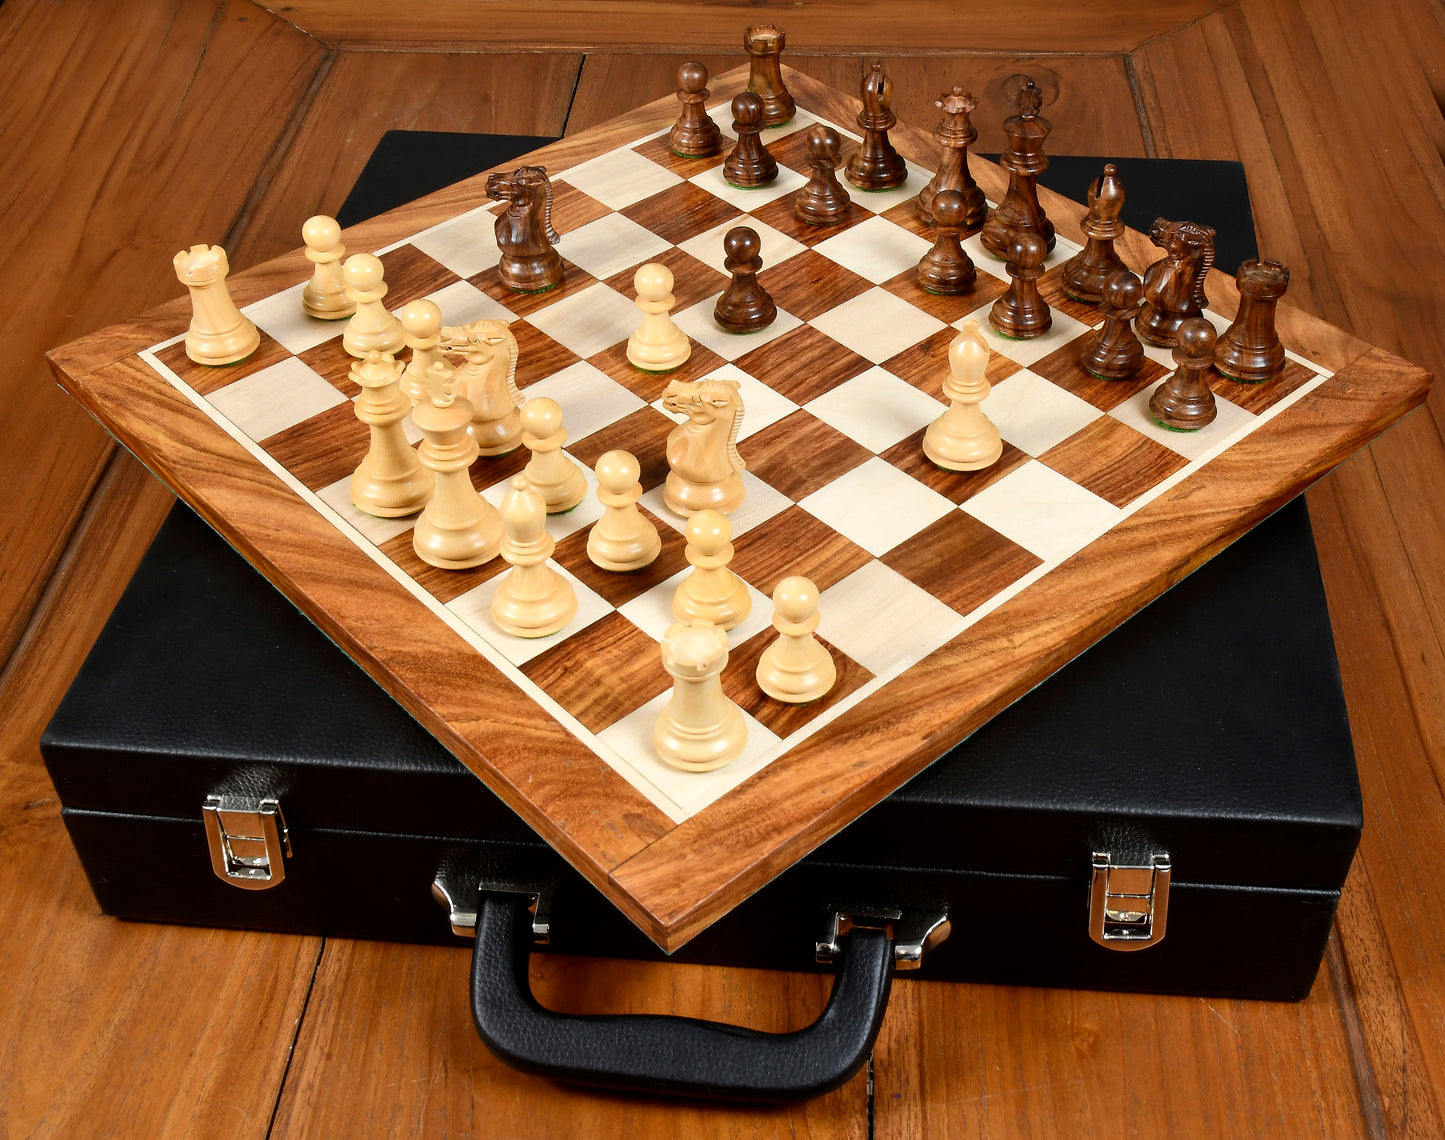 Combo The collector Wooden Staunton Chess Set in Sheesham & Boxwood Pieces, Wooden Chessboard and Storage Box -2.8" King